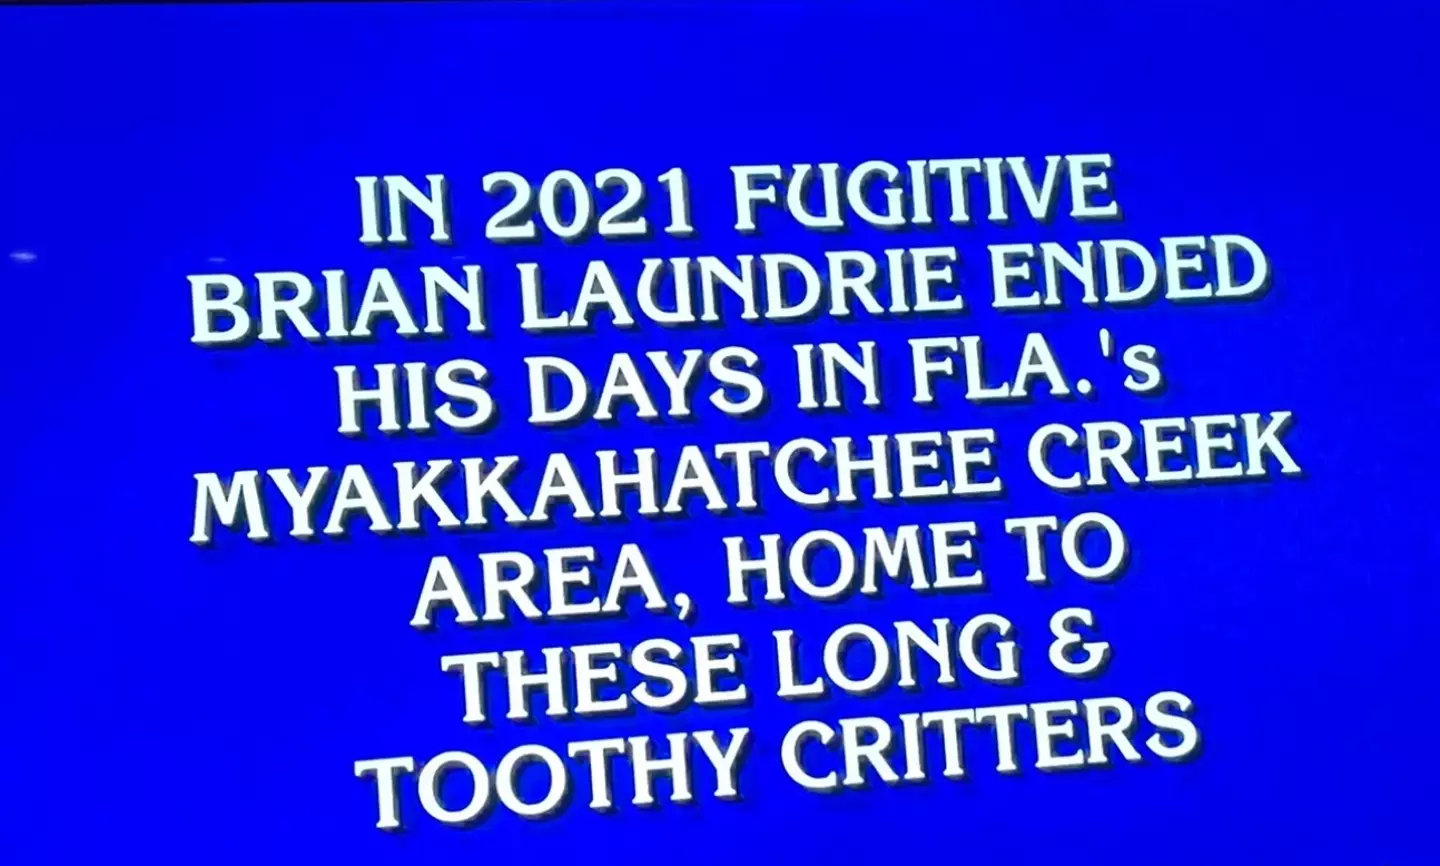 Jeopardy! has been criticised for the 'insensitive' clue.